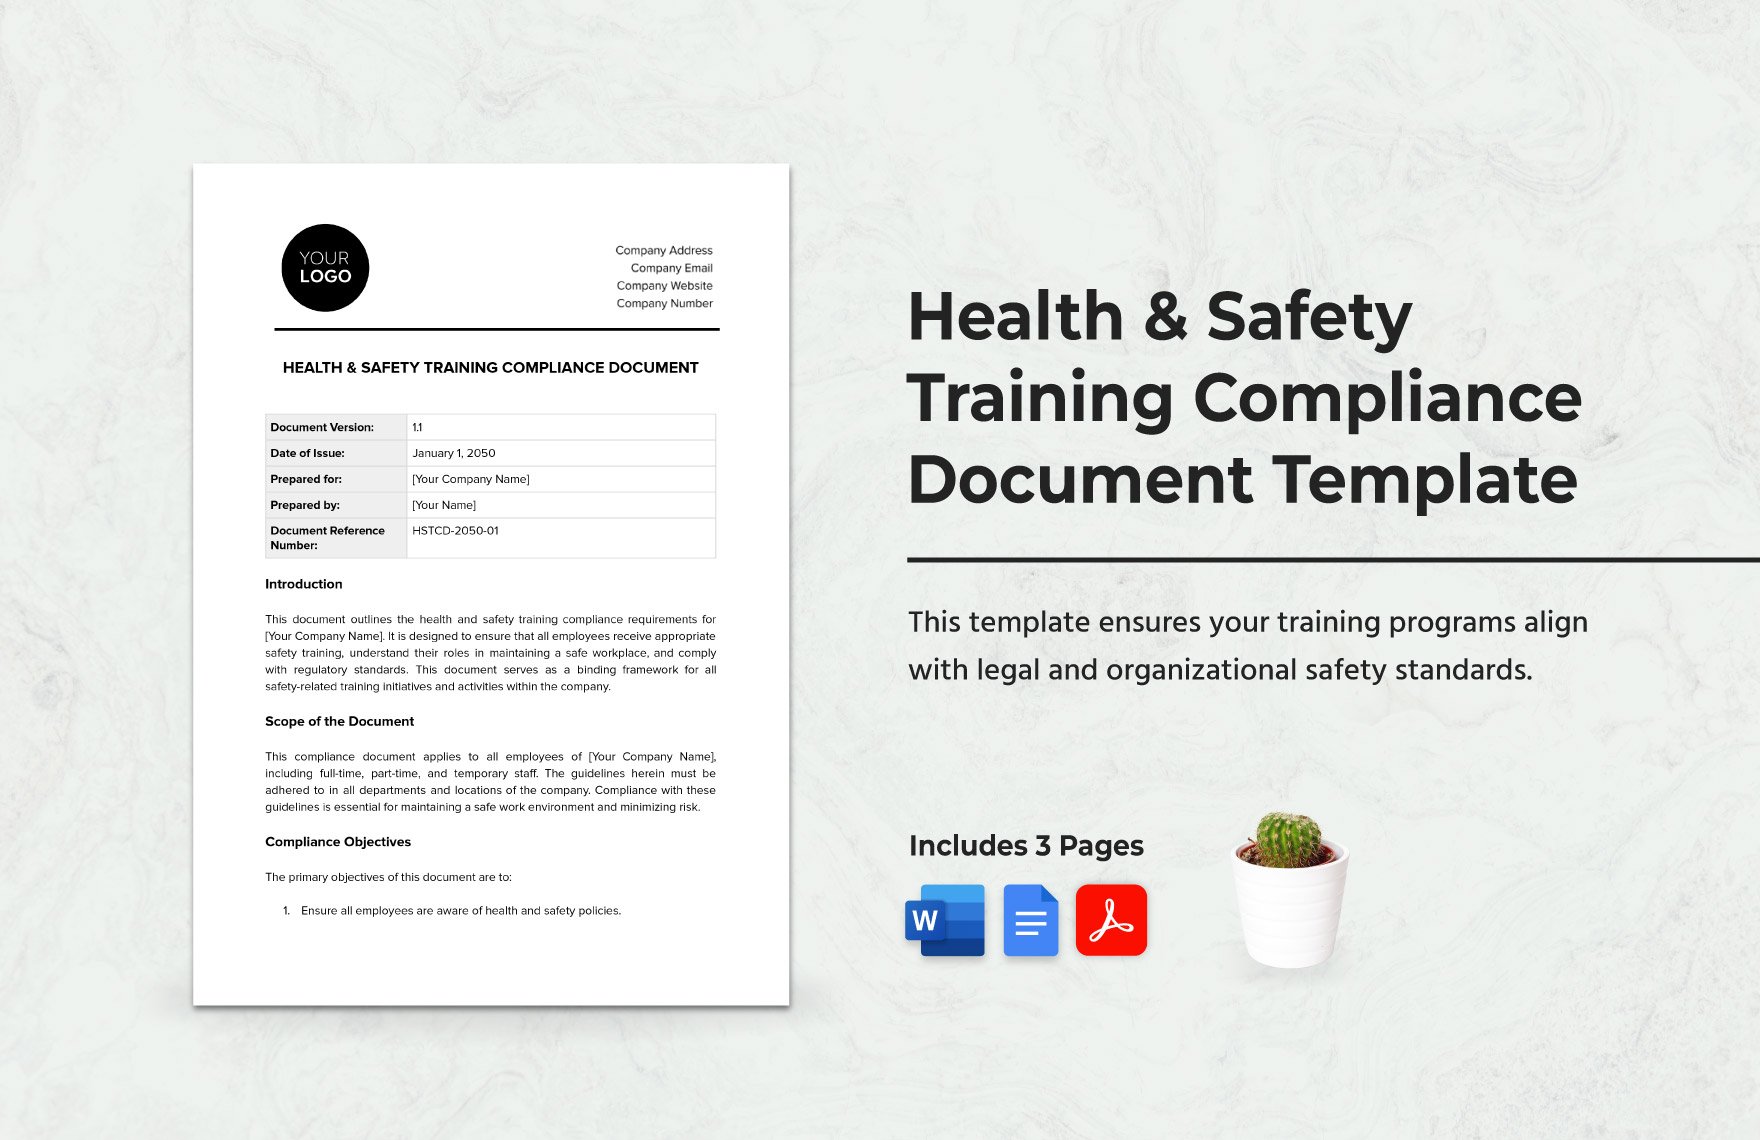 Health & Safety Training Compliance Document Template